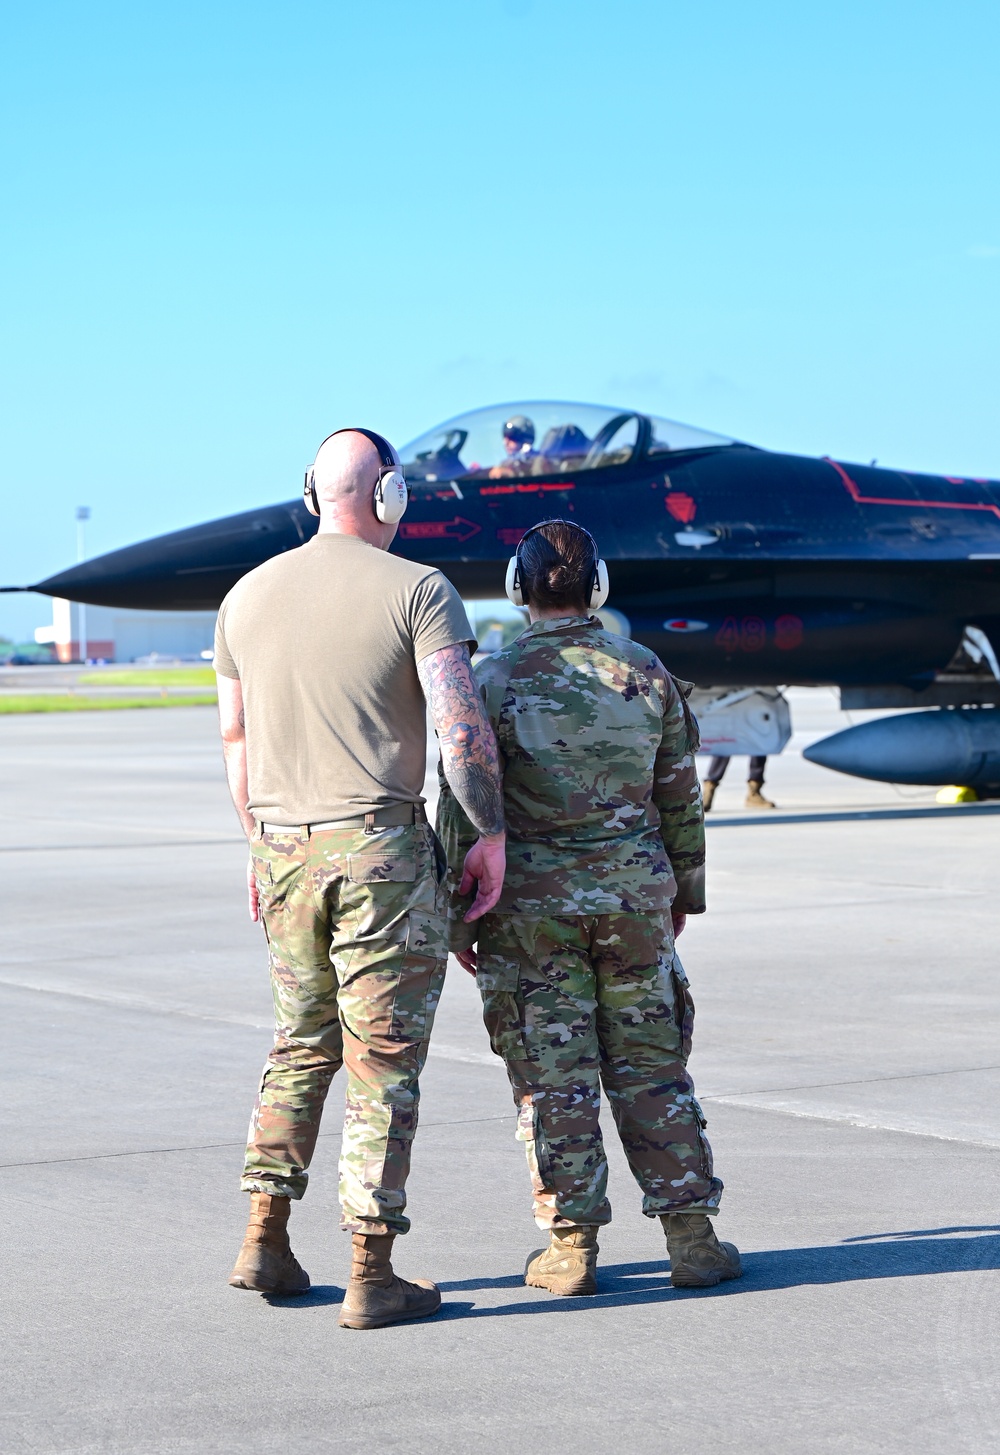 William Tell brings flight line operations to the Air Dominance Center and 165th Airlift Wing